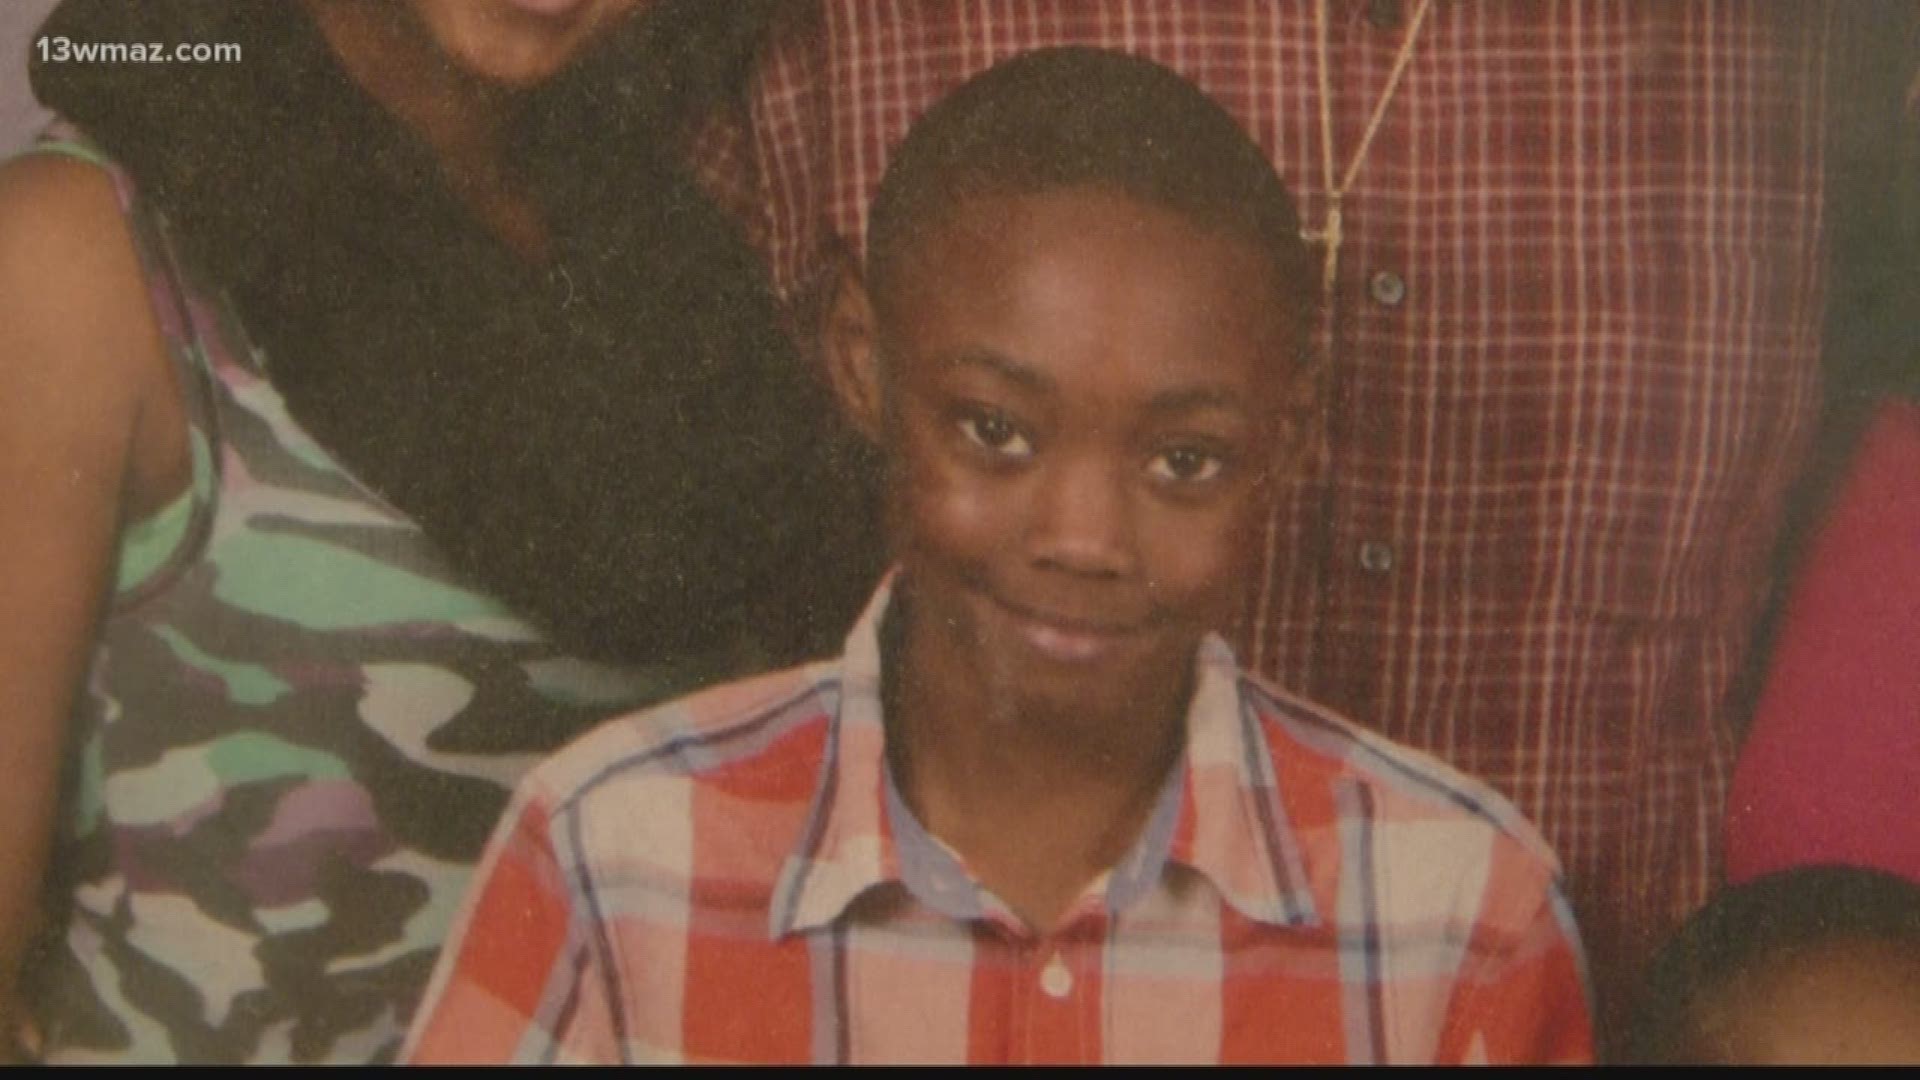 14-year-old Brandon Jones was killed in a wreck in Rentz, Georgia Sunday afternoon, after the driver of the car he was in lost control, causing both of them to be ejected from the overturned car. Now, the Laurens County community is trying to comfort his family.